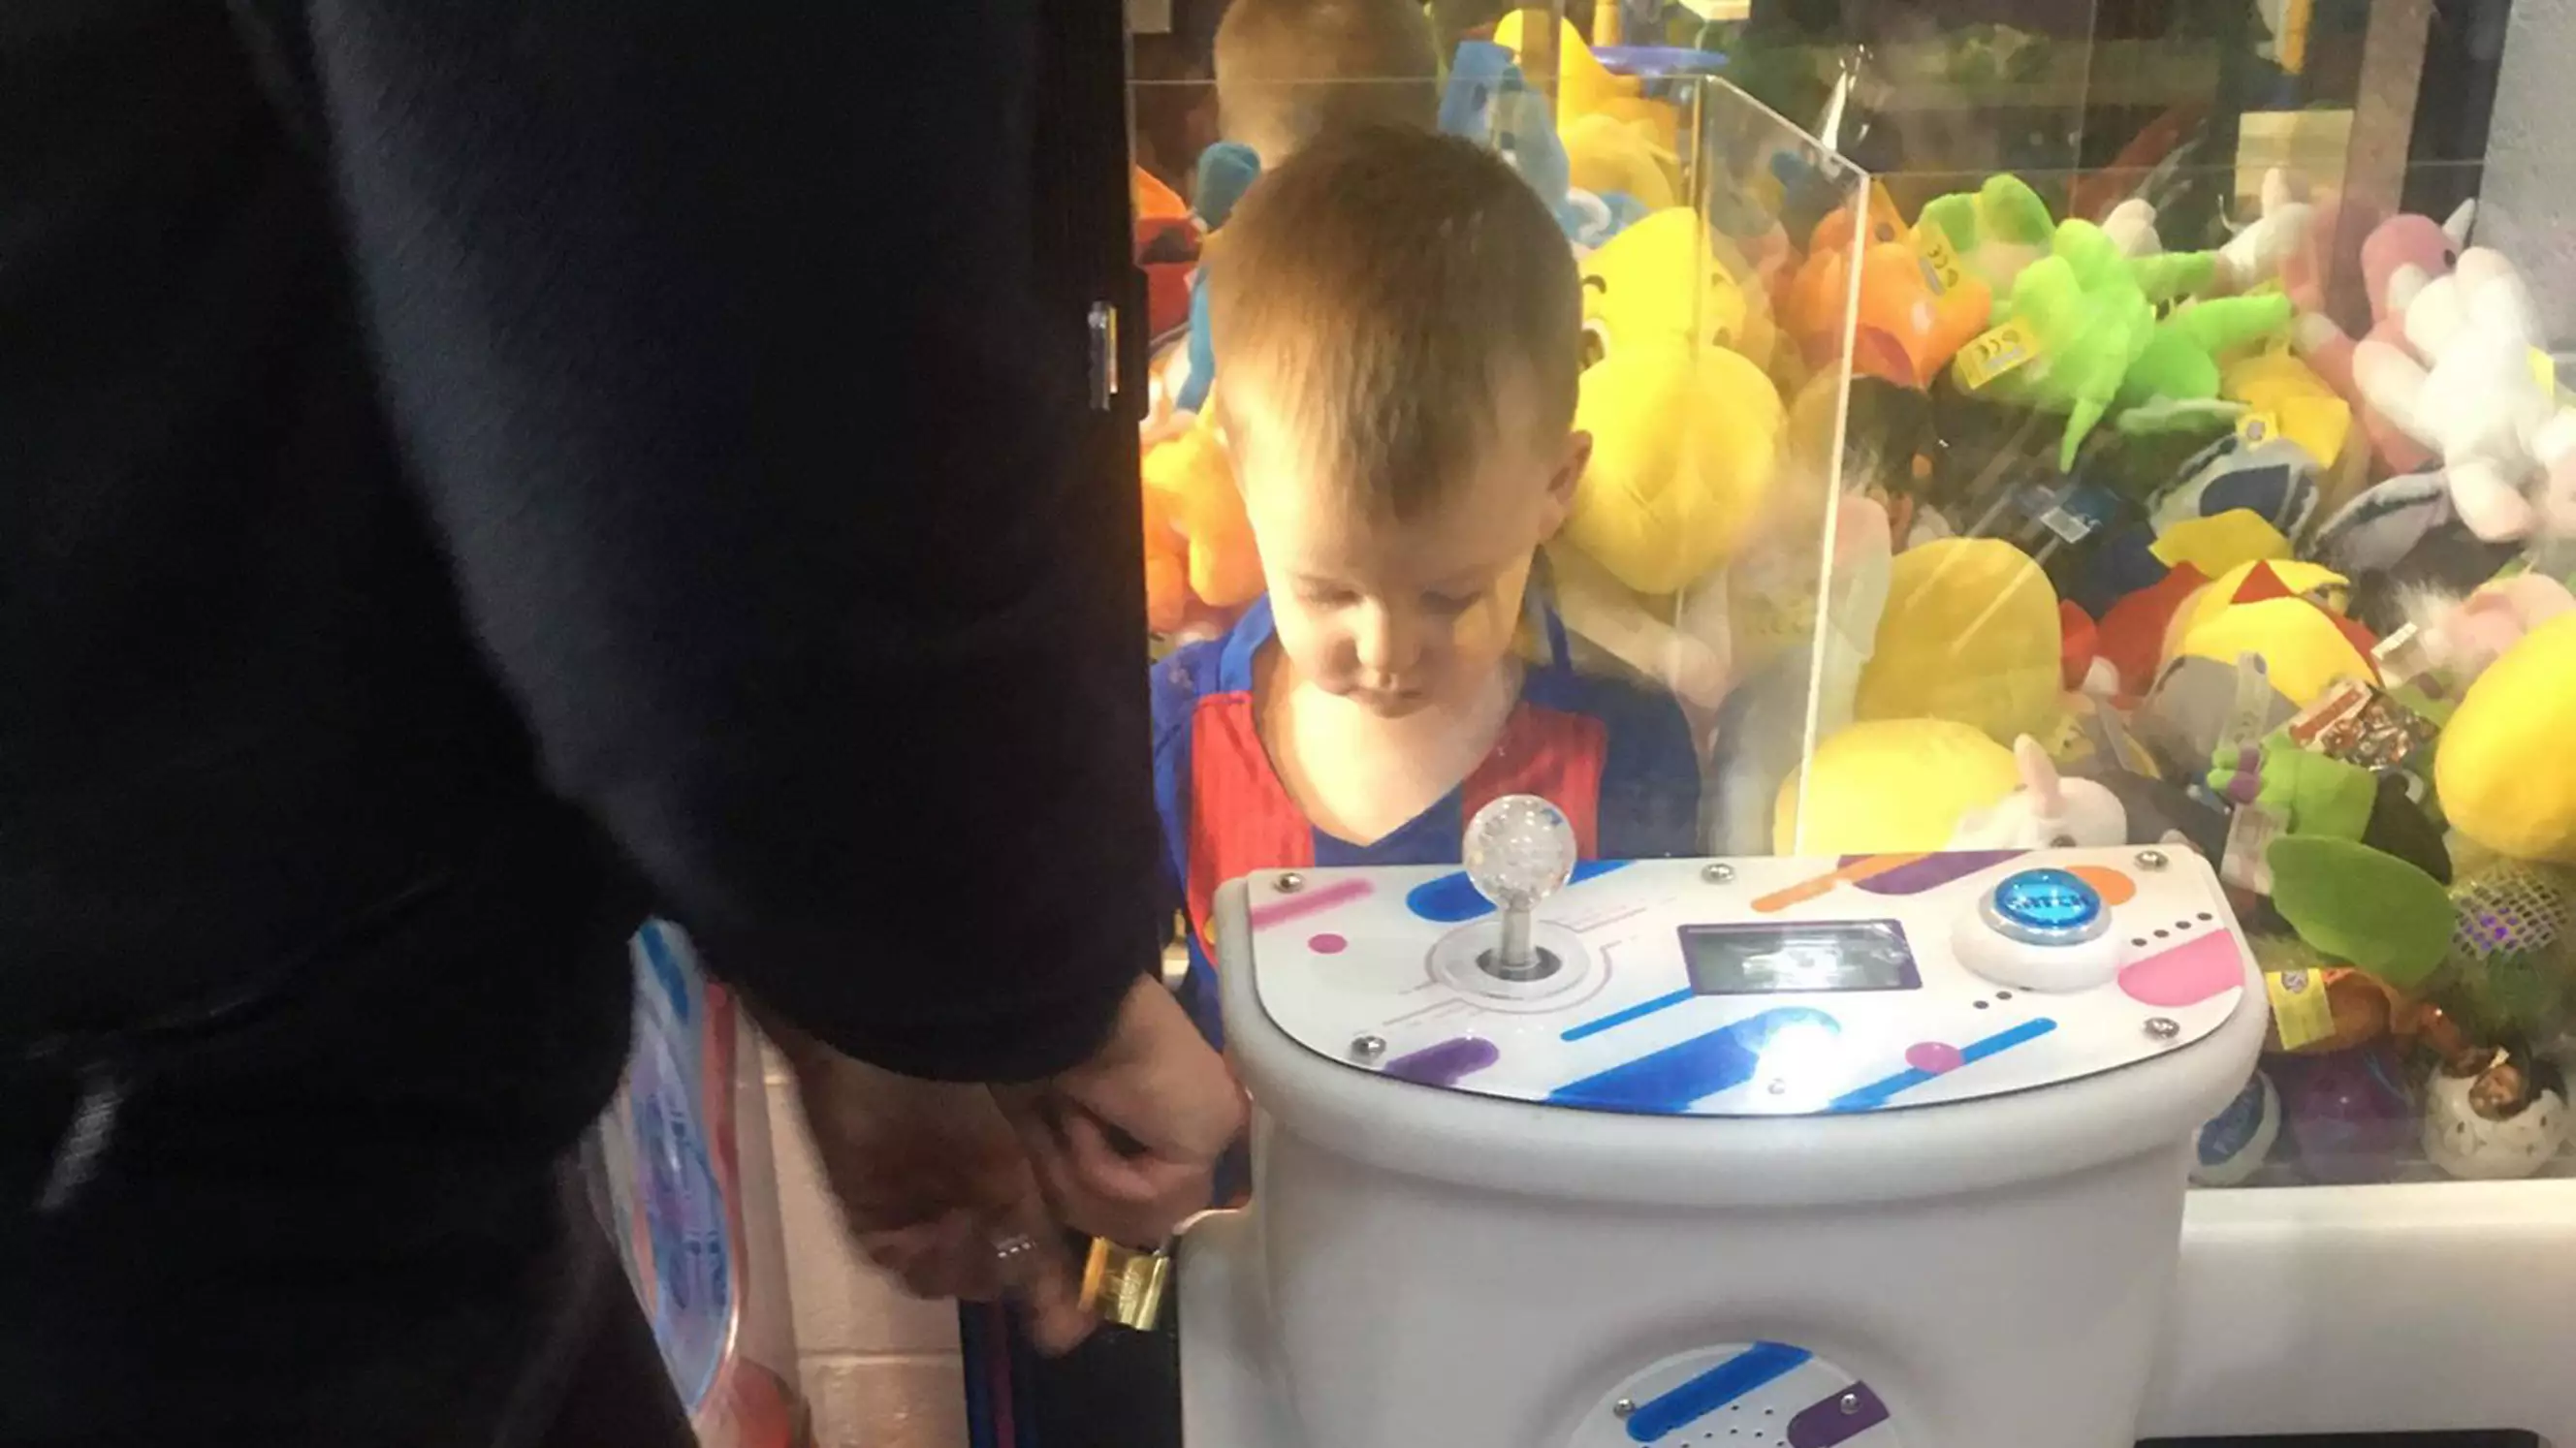 Little Boy Gets Stuck In Arcade Grabber After Climbing In For Teddy